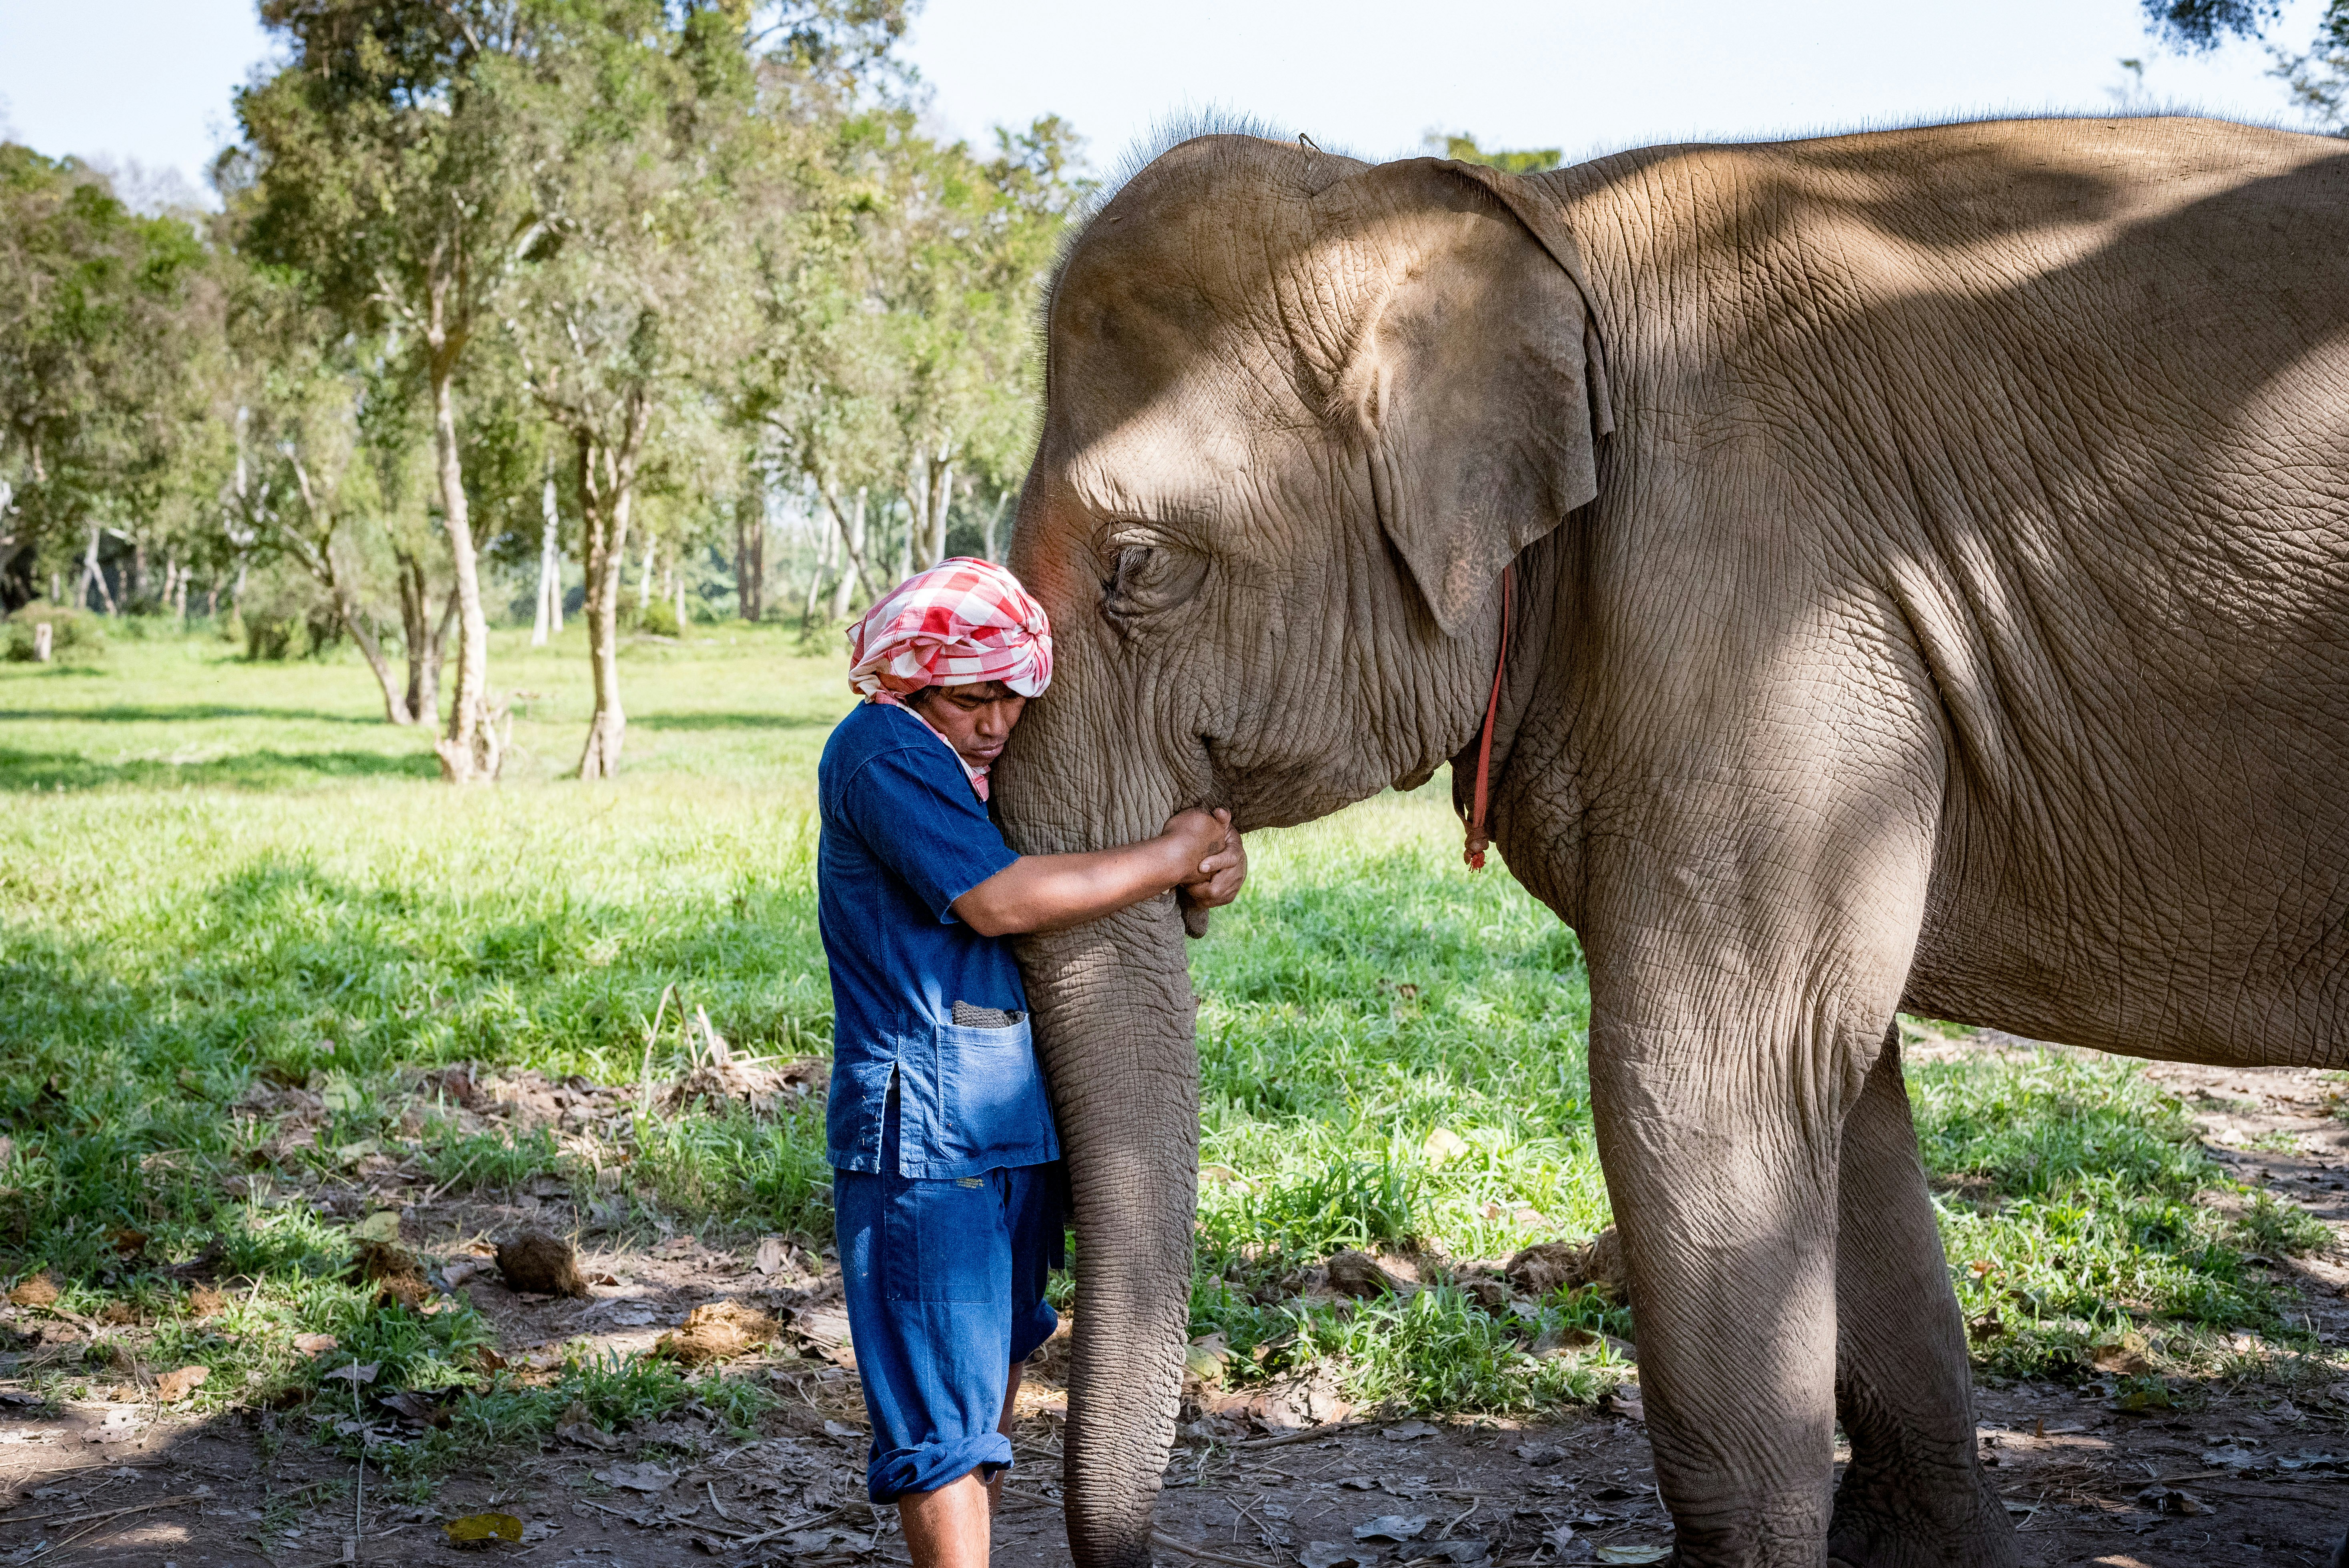 A mahout hugs the trunk of his elephant in a gentle and affectionate gesture of love